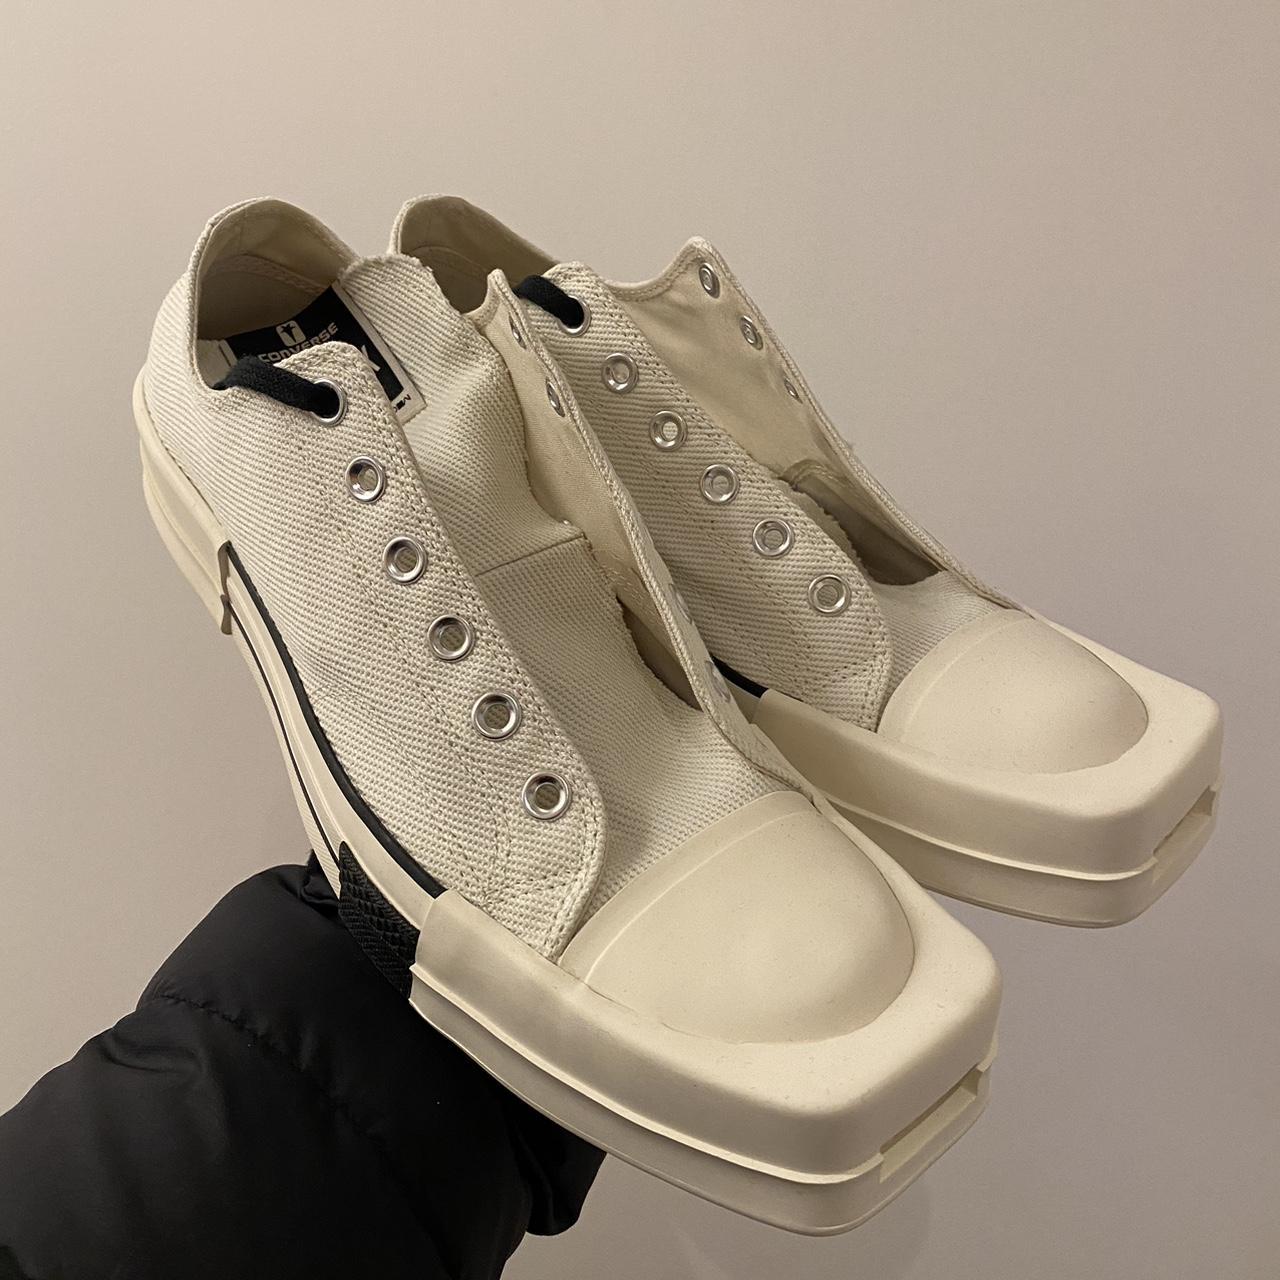 Rick Owens Men's Cream and White Trainers | Depop